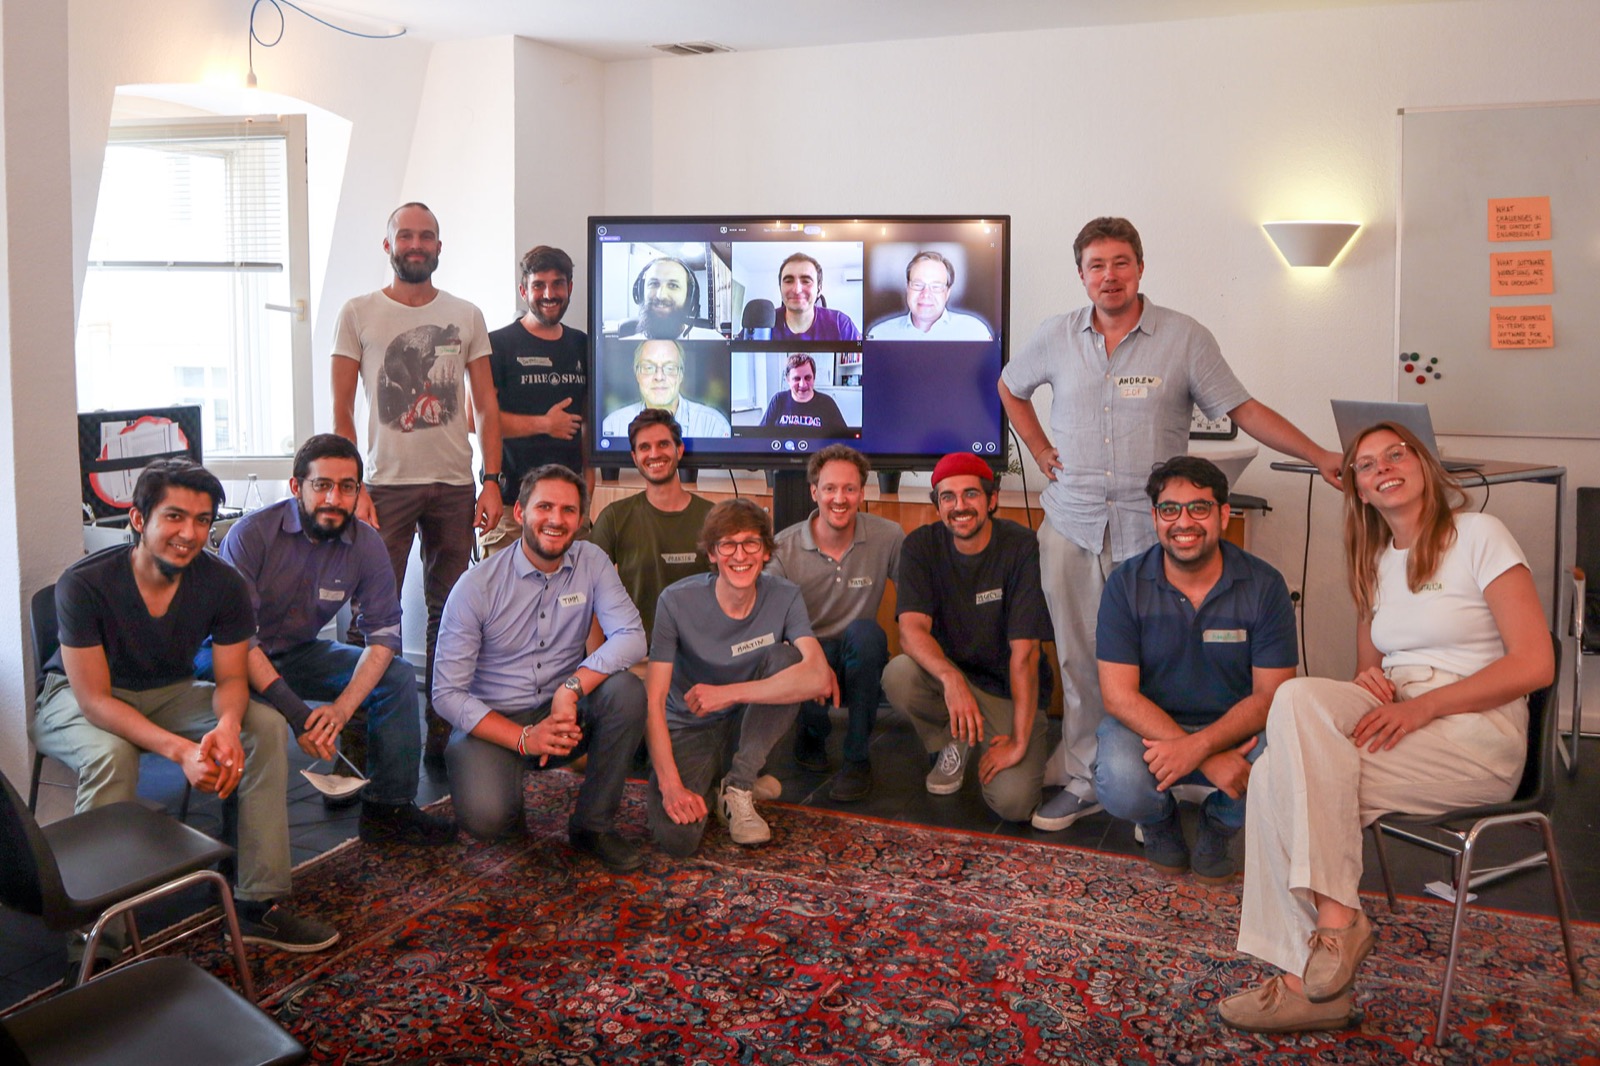 Group photo with employees of the Open Toolchain Foundation in front of a monitor